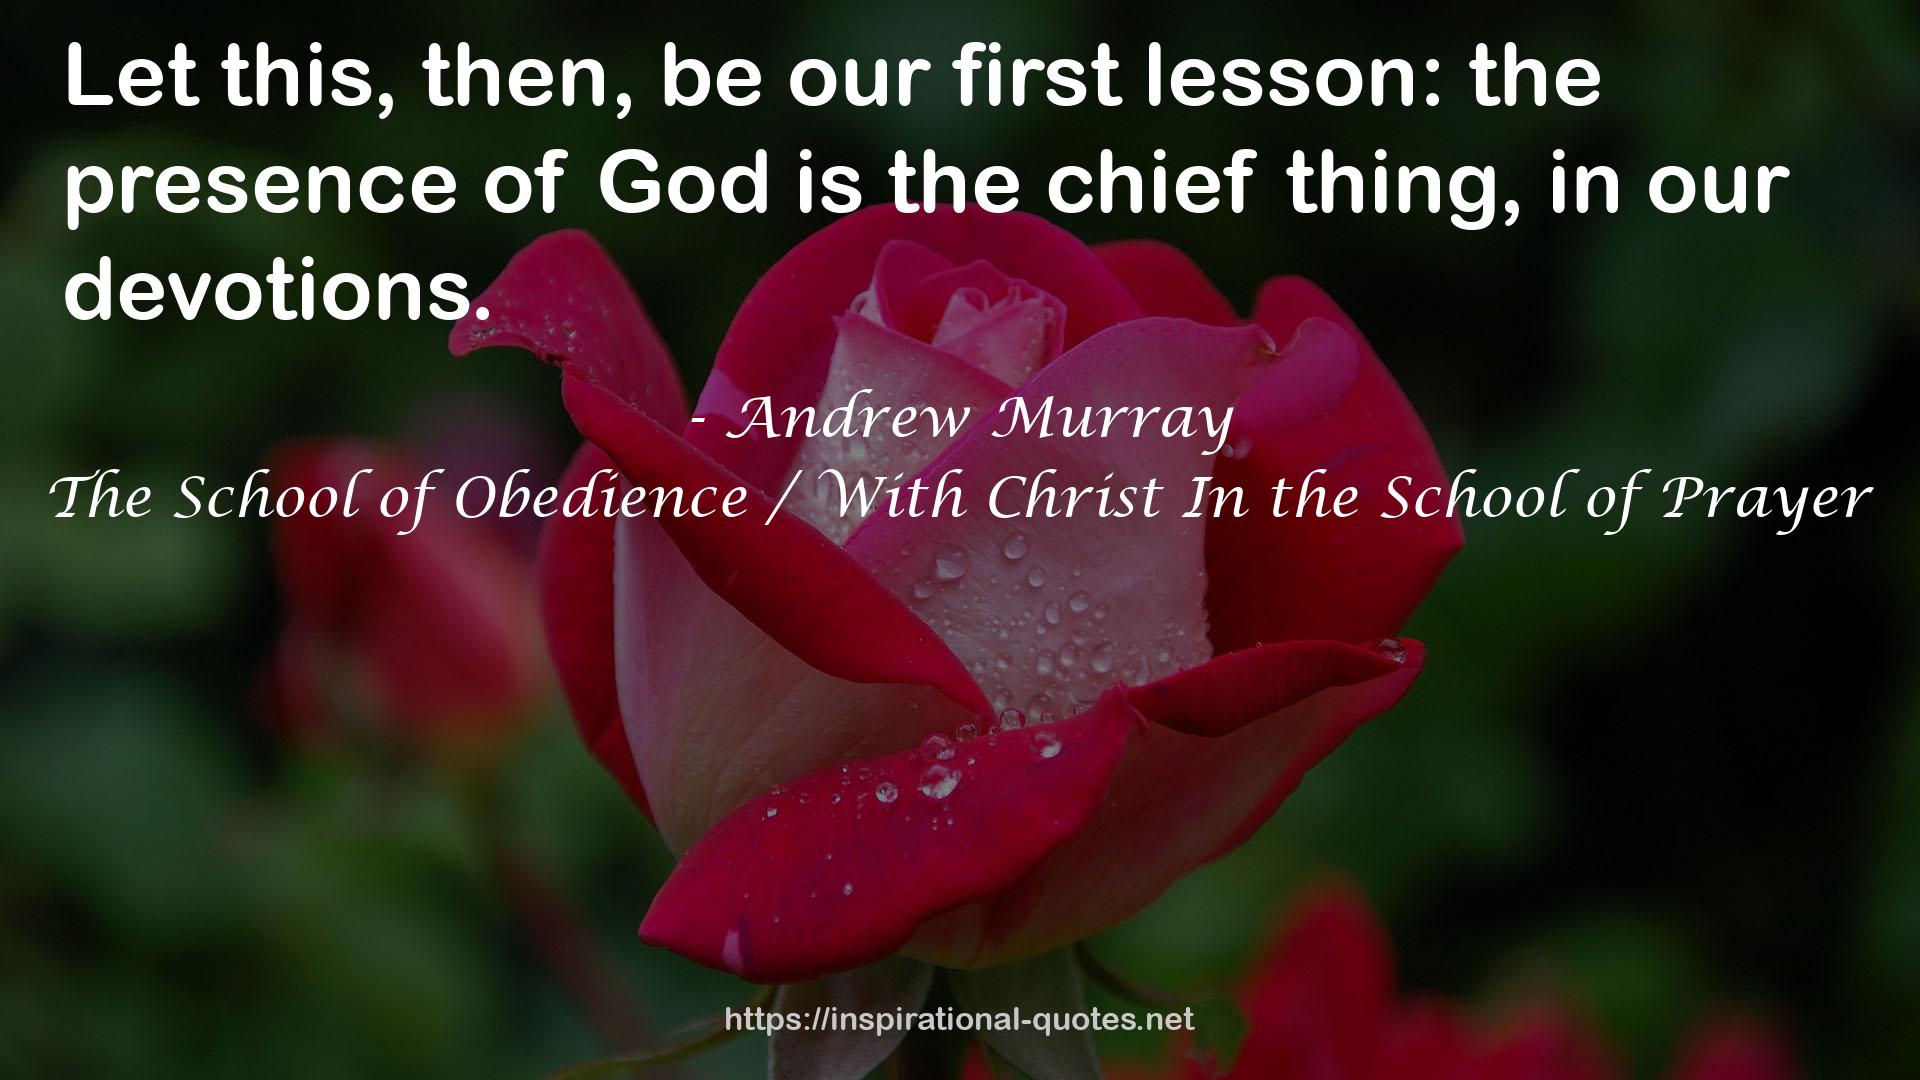 The School of Obedience / With Christ In the School of Prayer QUOTES